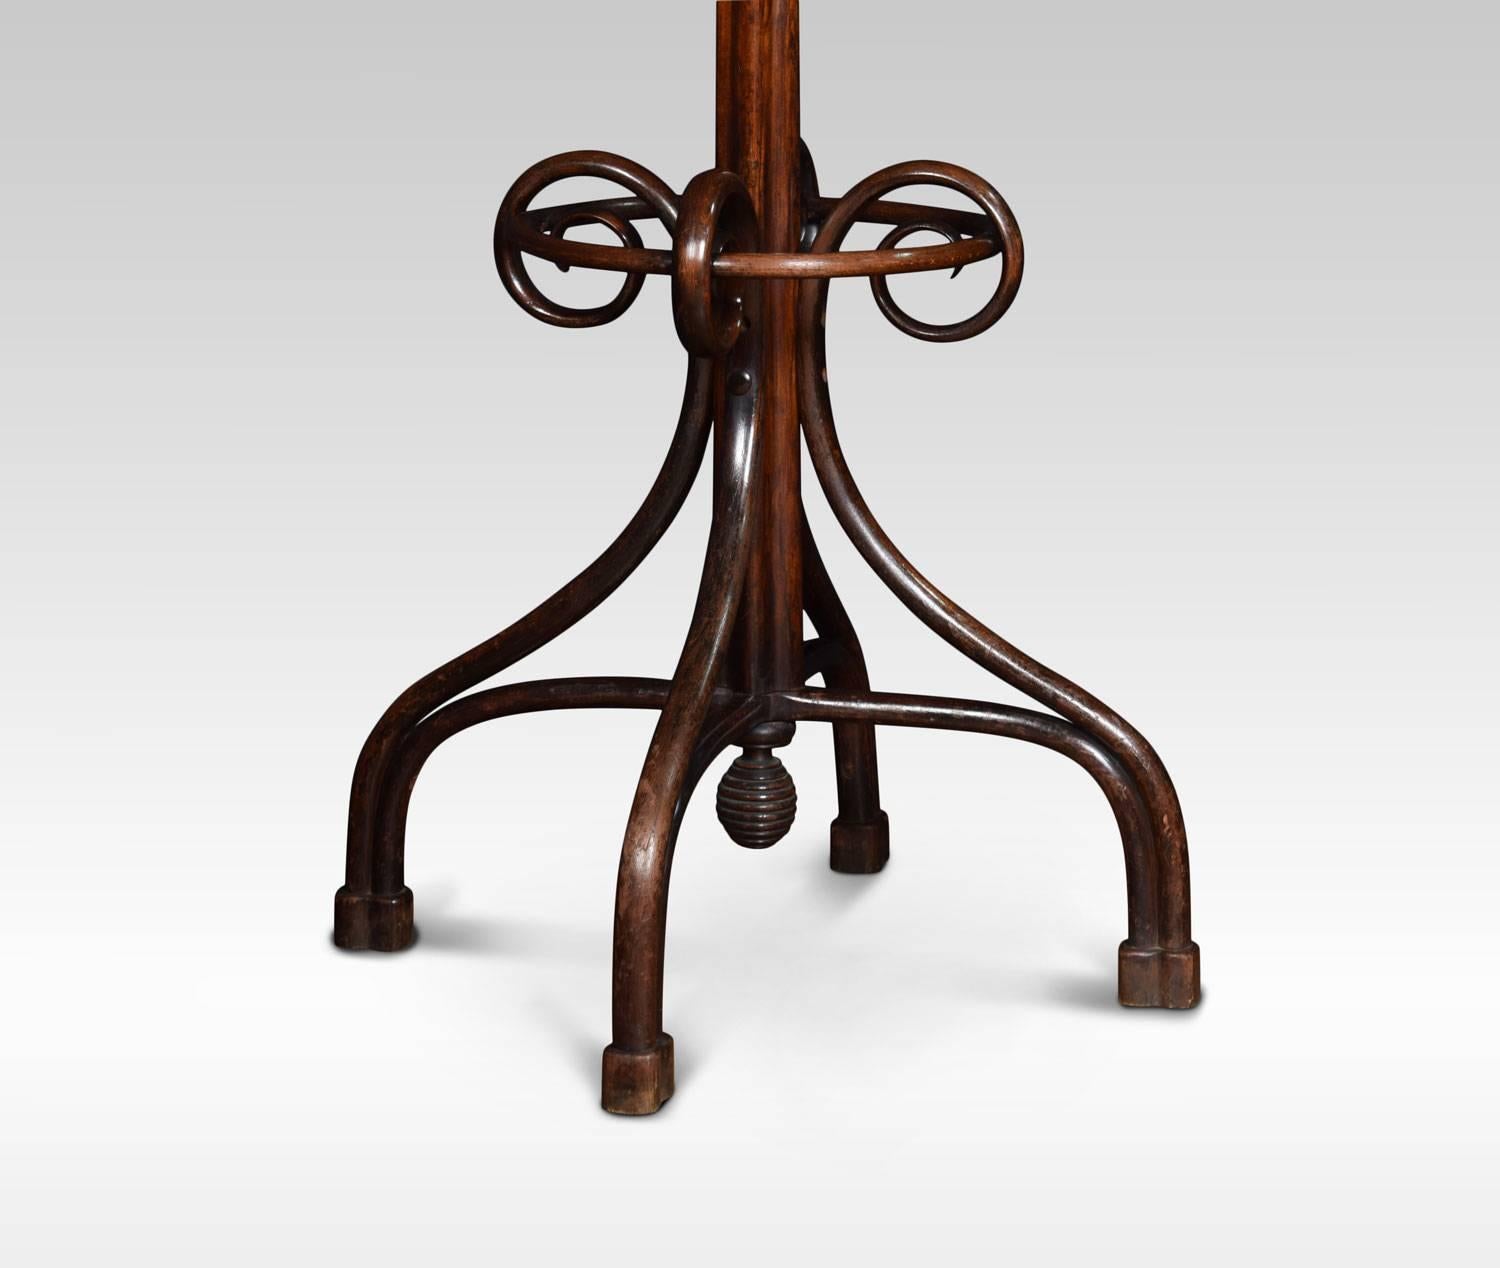 Late 19th century bentwood hall or hat stand. The top section having shaped supports above large central column to the base having four similar shaped supports
Dimensions:
Height 77 inches
Width 30.5 inches
Depth 30.5 inches.